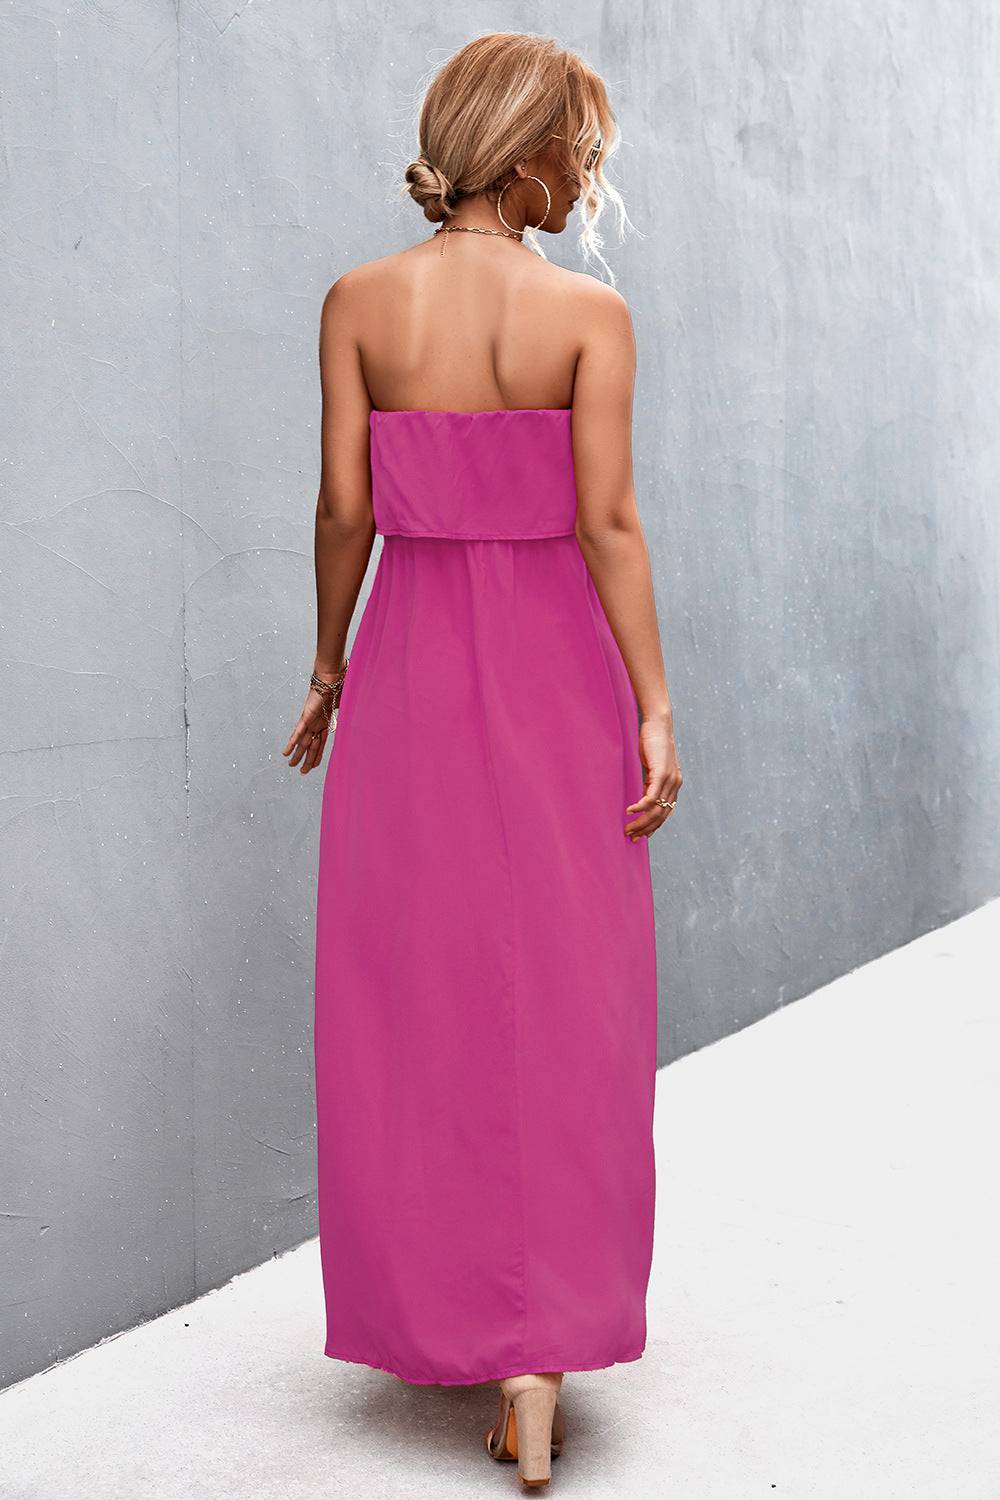 Enchanting Dreams Strapless Maxi Dress - Embrace Your Inner Goddess and Indulge in a World of Romance - Crafted for Timeless Beauty. - Guy Christopher